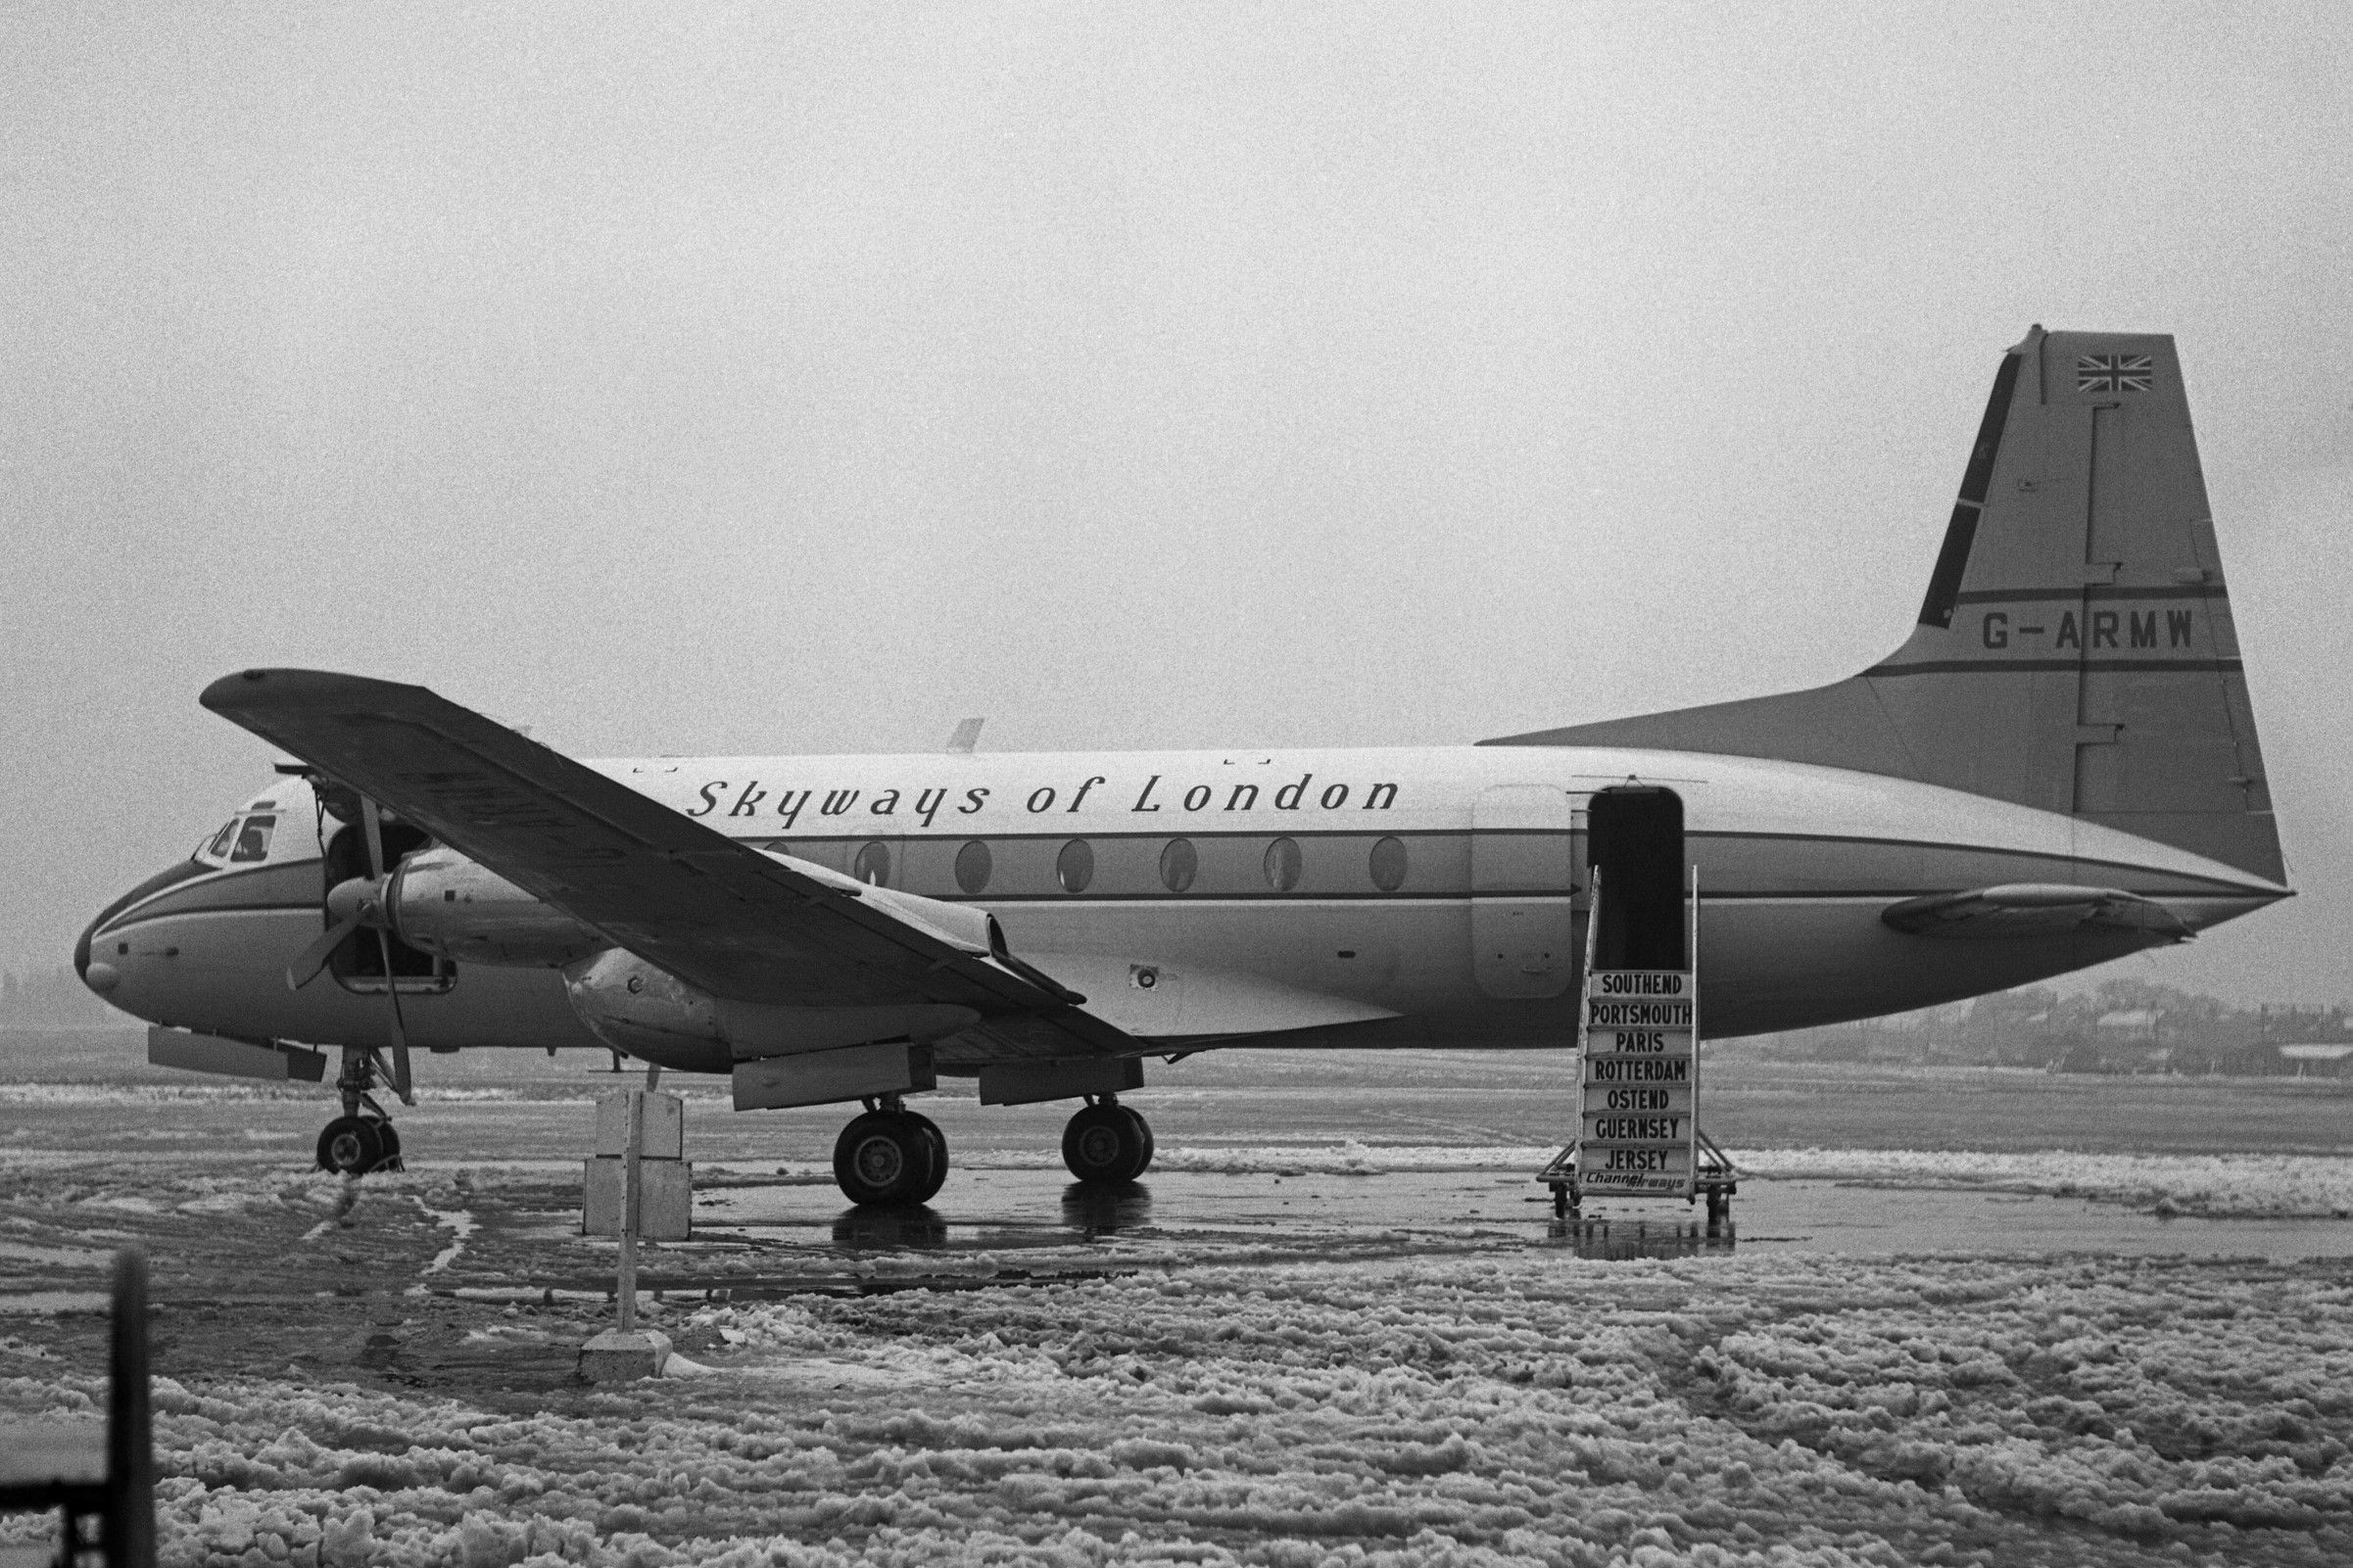 A Skyways Avro/HS 748 Parked on a snowy airport apron With its Stairs Deployed.